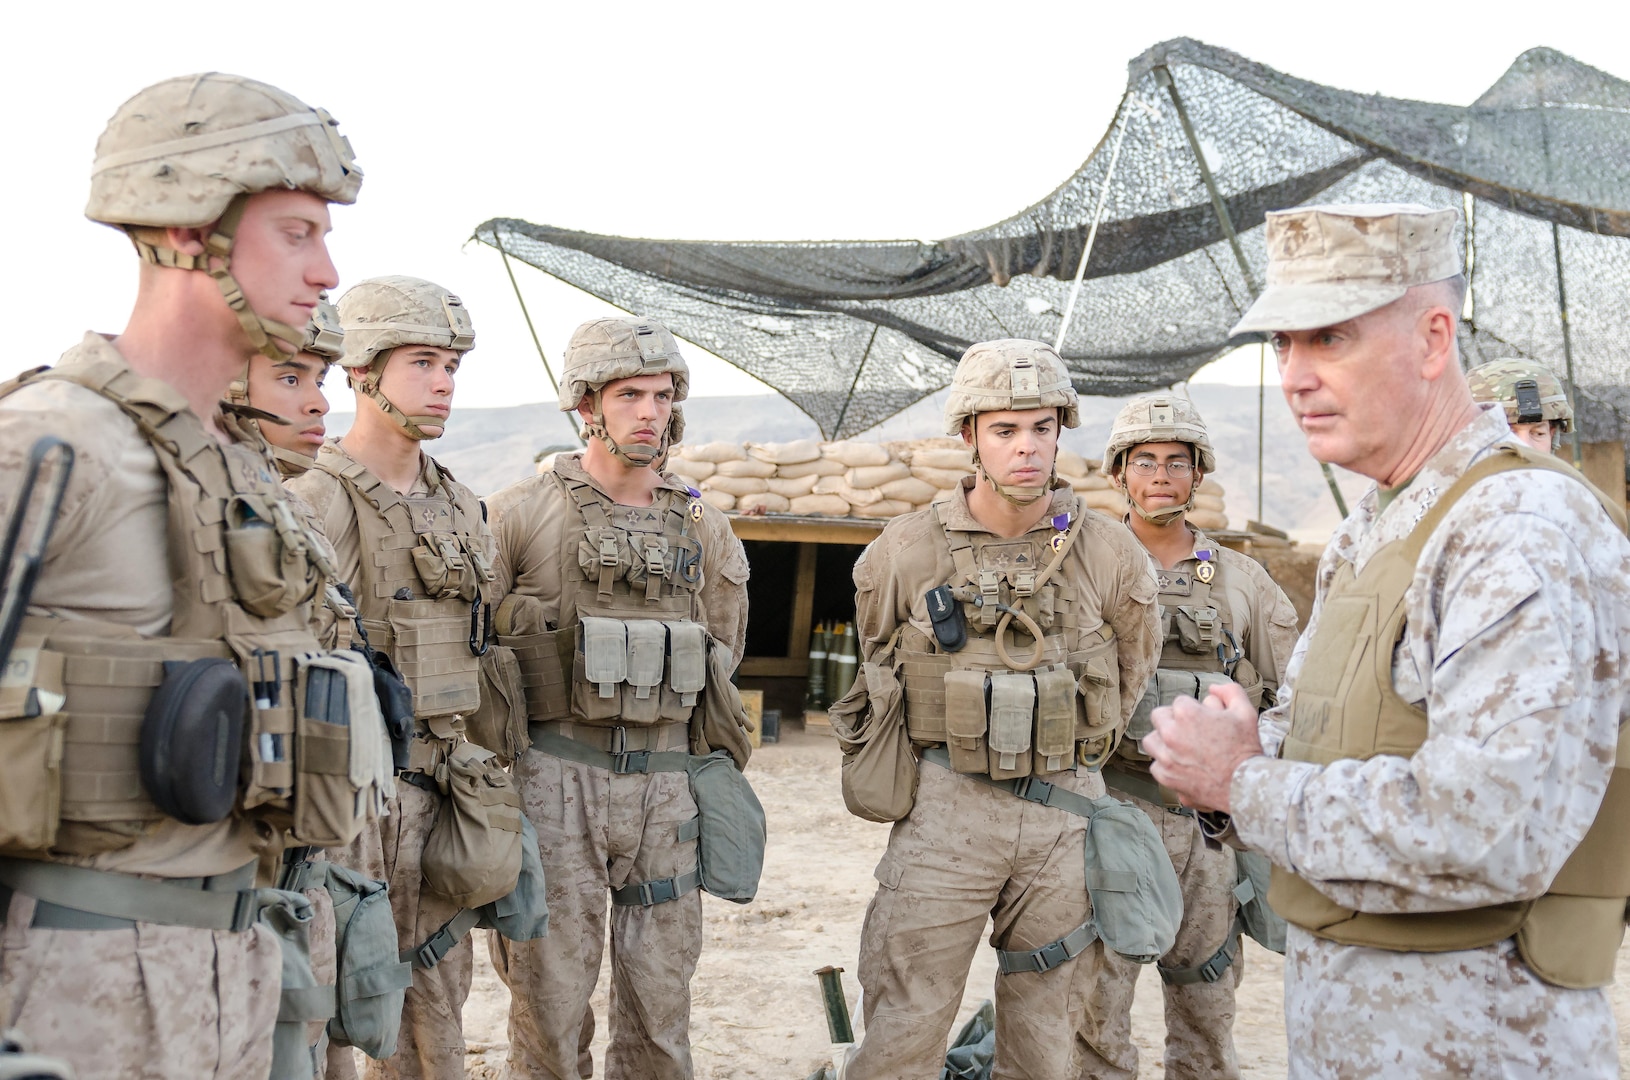 Chairman of the Joint Chiefs of Staff Gen. Joseph Dunford visits with U.S. Marines of the 26th Marine Expeditionary Unit at Kara Soar Base, Makhmur, Iraq, April 22, 2016, after presenting four Marines with the Purple Heart. (U.S. Army Photo by Staff Sgt. Peter J. Berardi)